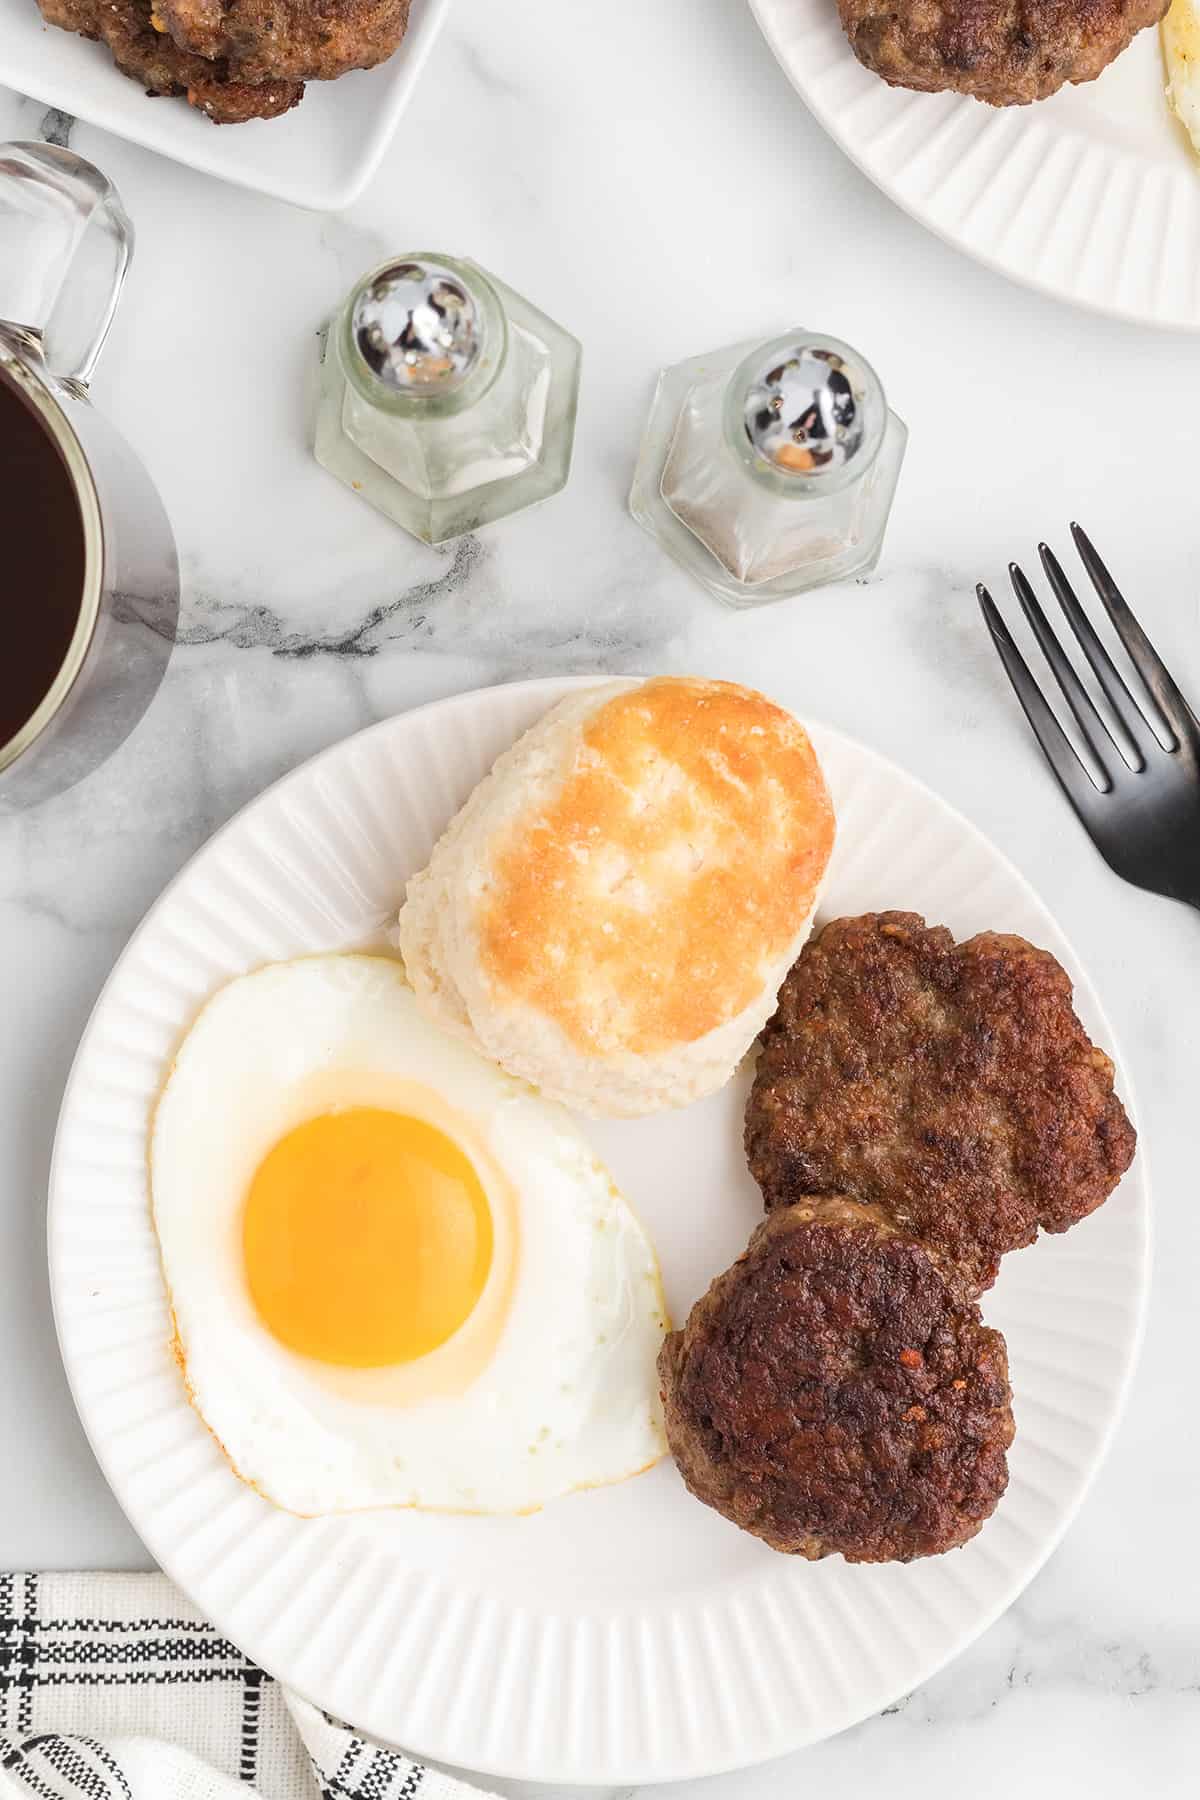 Sausage, a fried egg, and a biscuits on a plate.